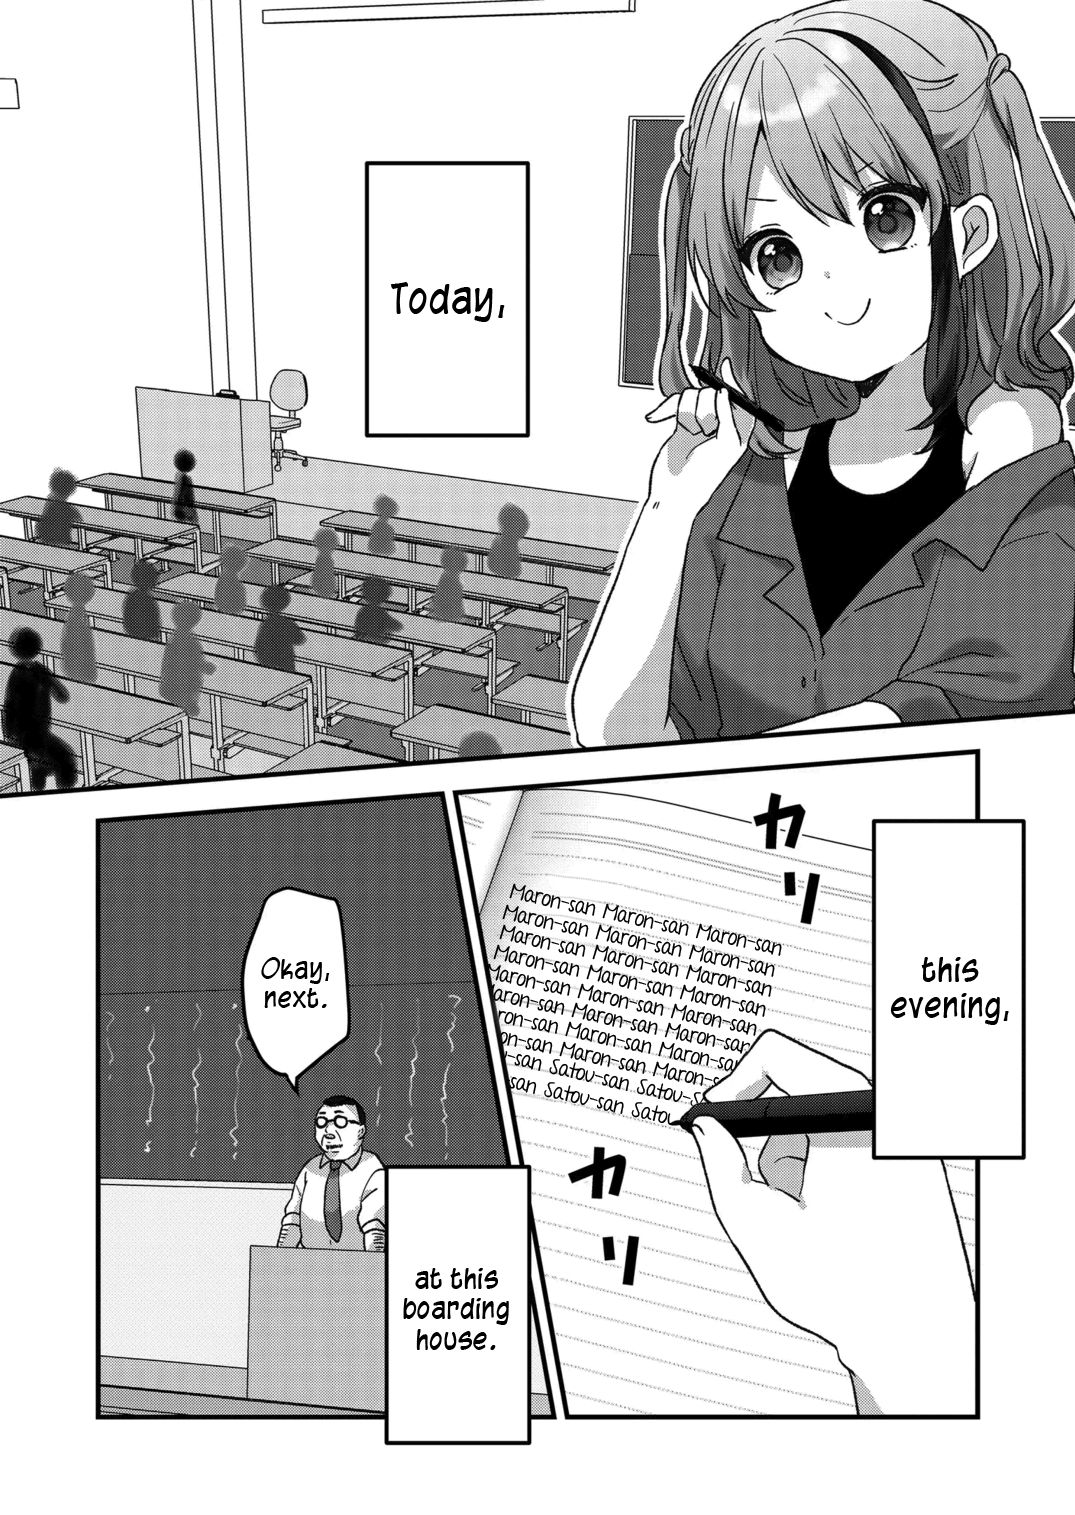 Failed University Exams I am Trash and Life is Hard, so I Tried Calling an Onee-san at Night - chapter 32 - #1